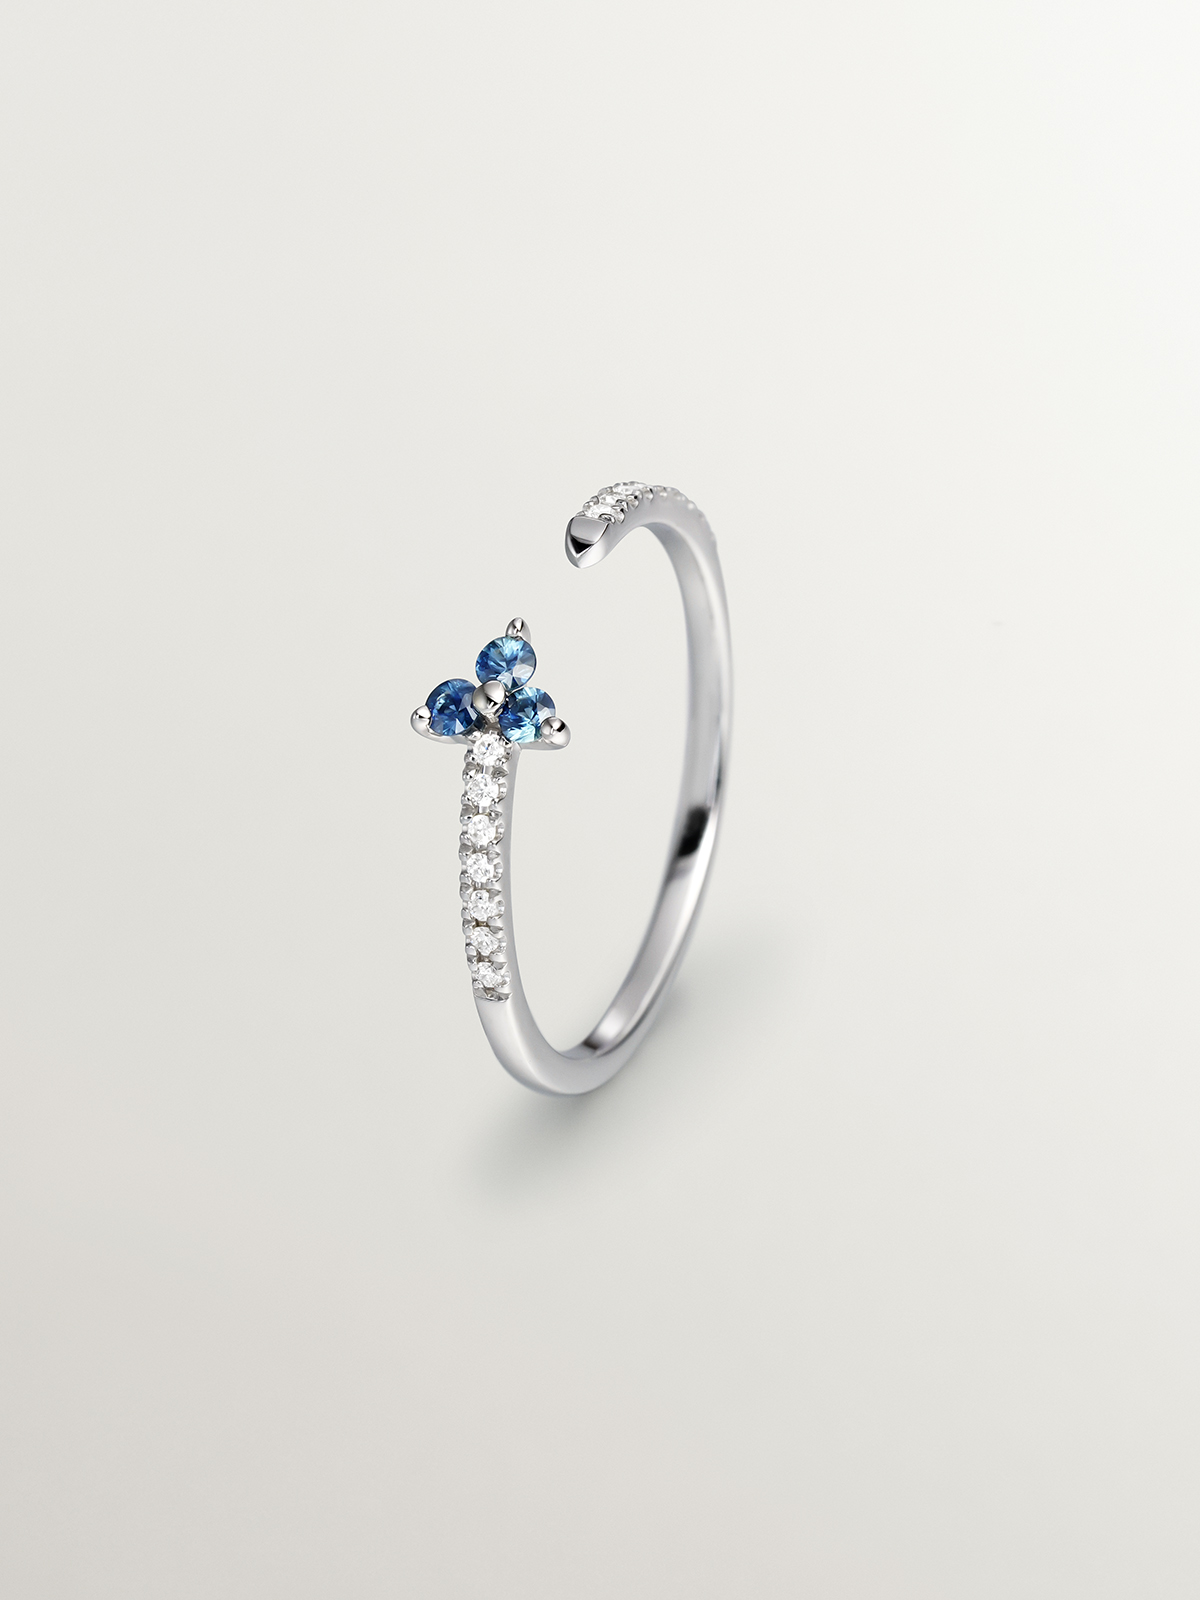 9K White Gold Ring with Diamonds and Blue Sapphire Clover